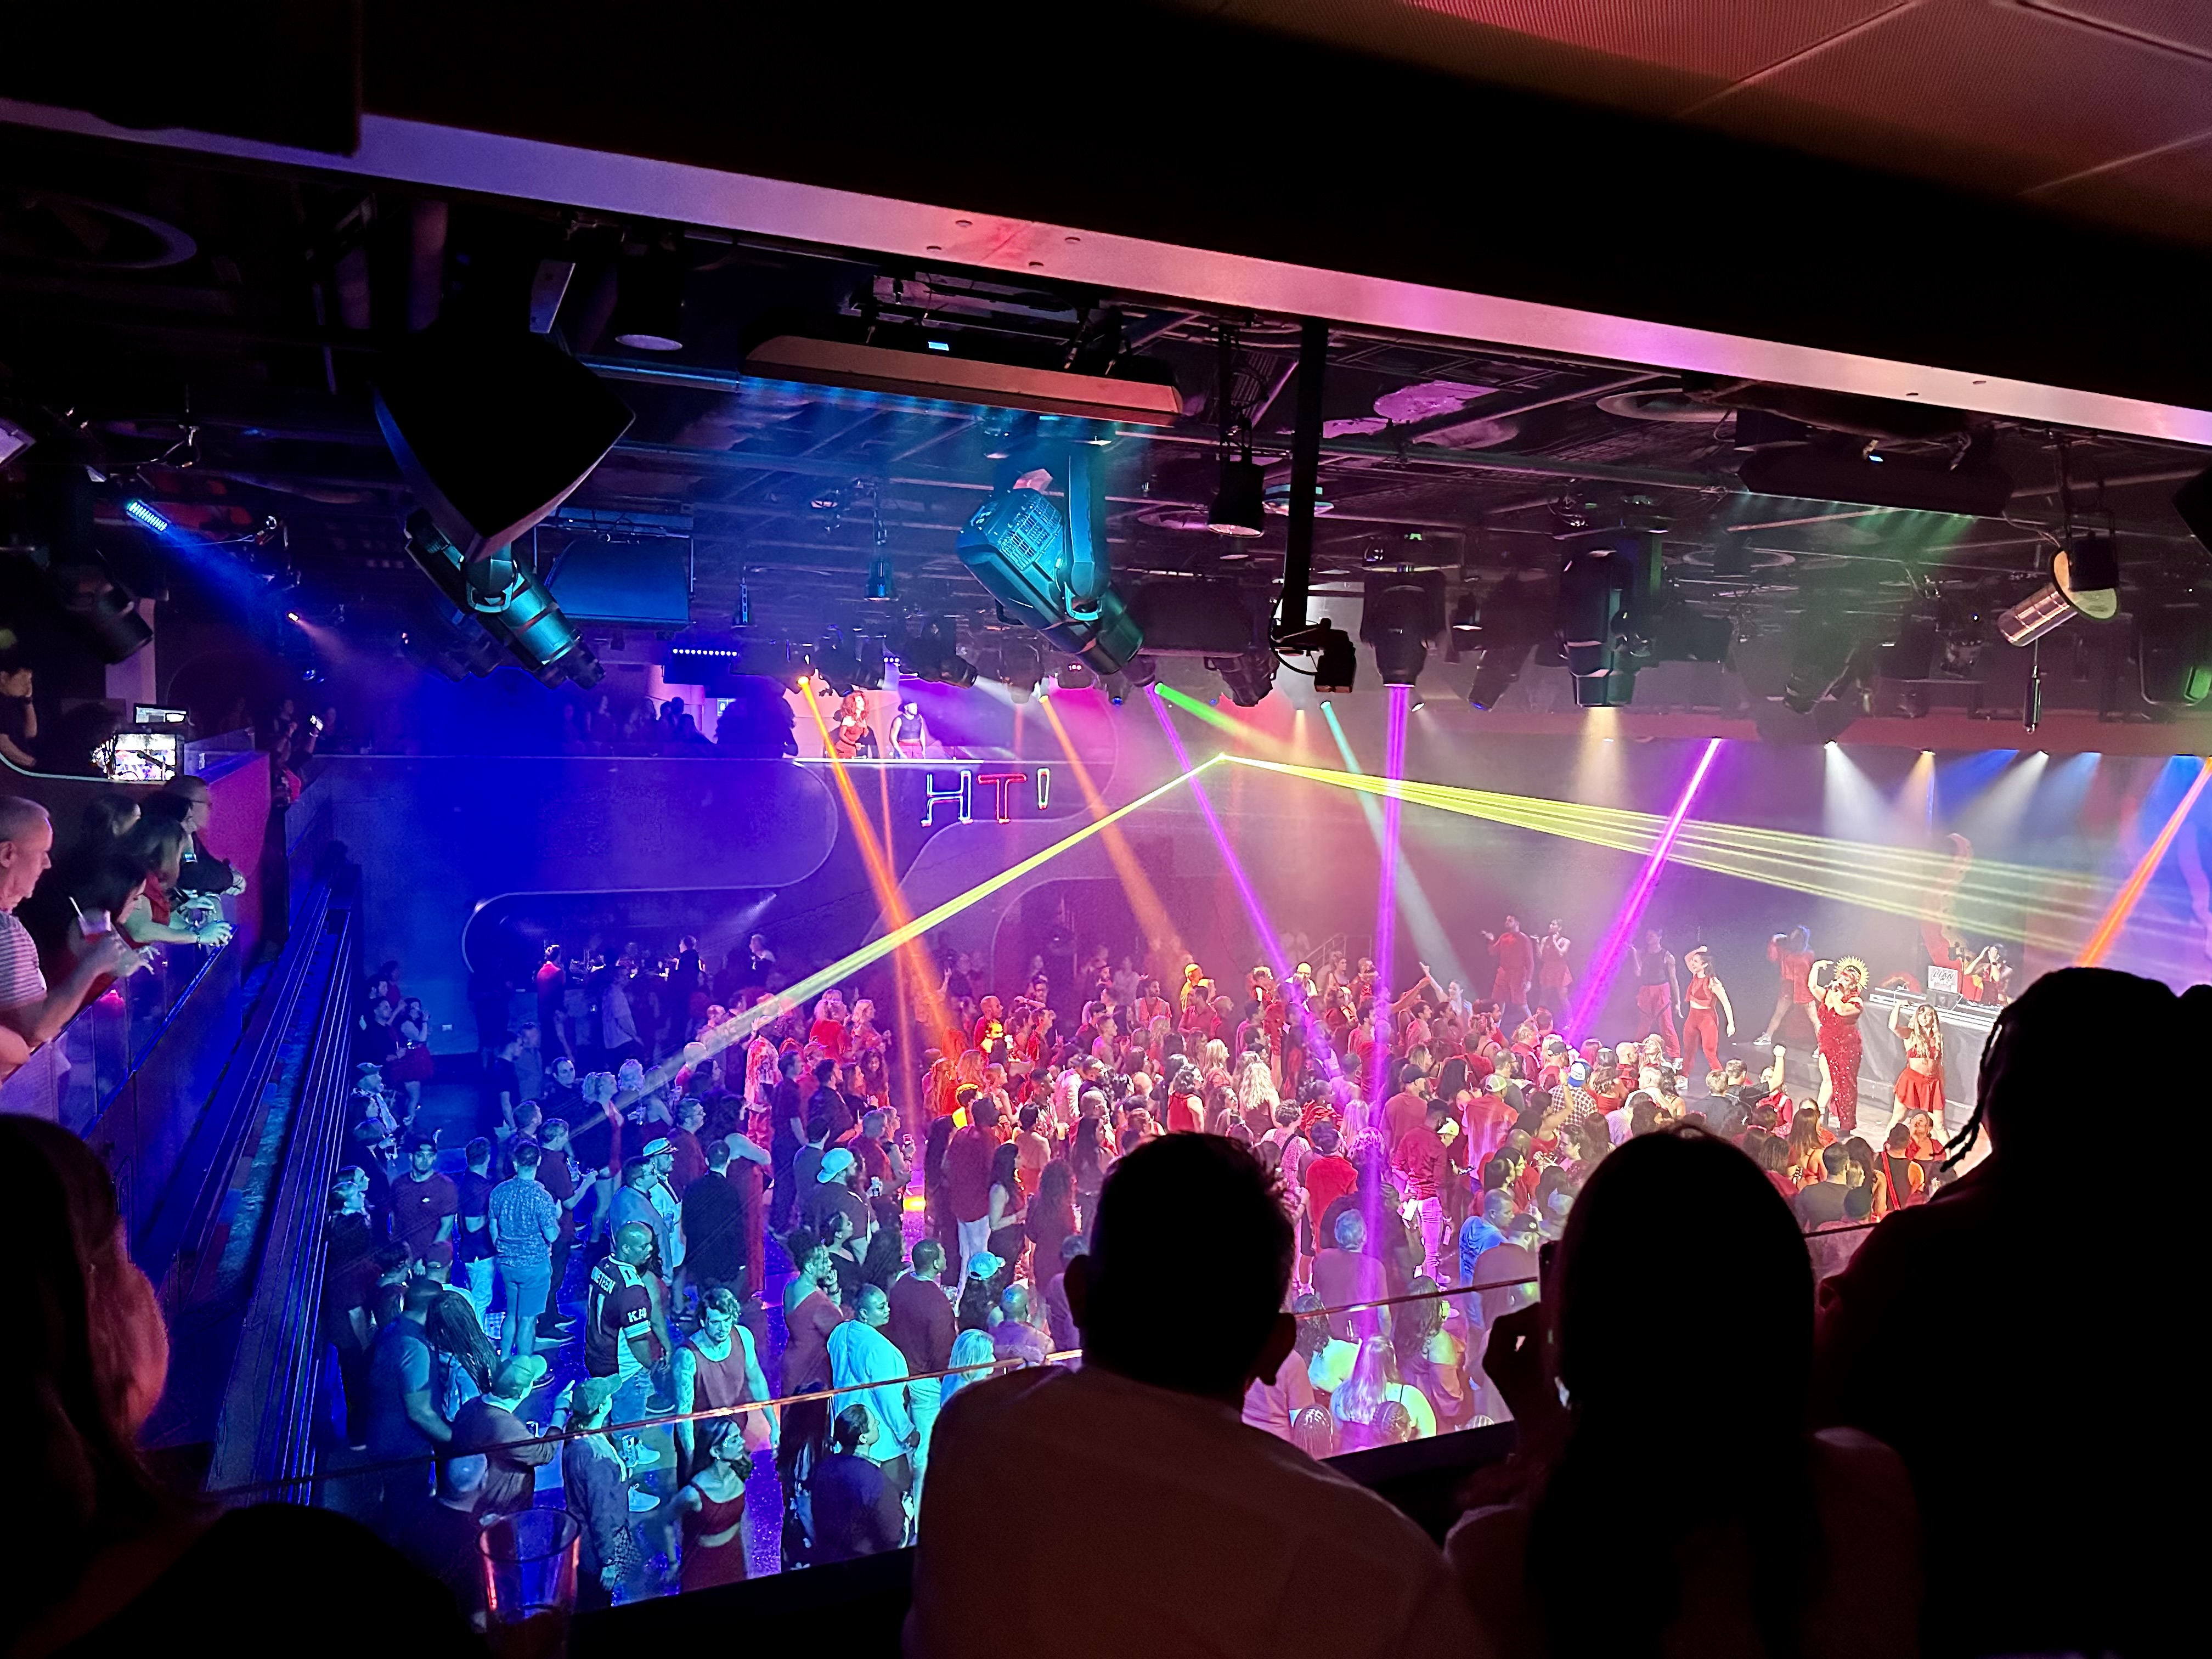 a crowd of people in a room with lights and a stage on Virgin Voyages Scarlet Lady